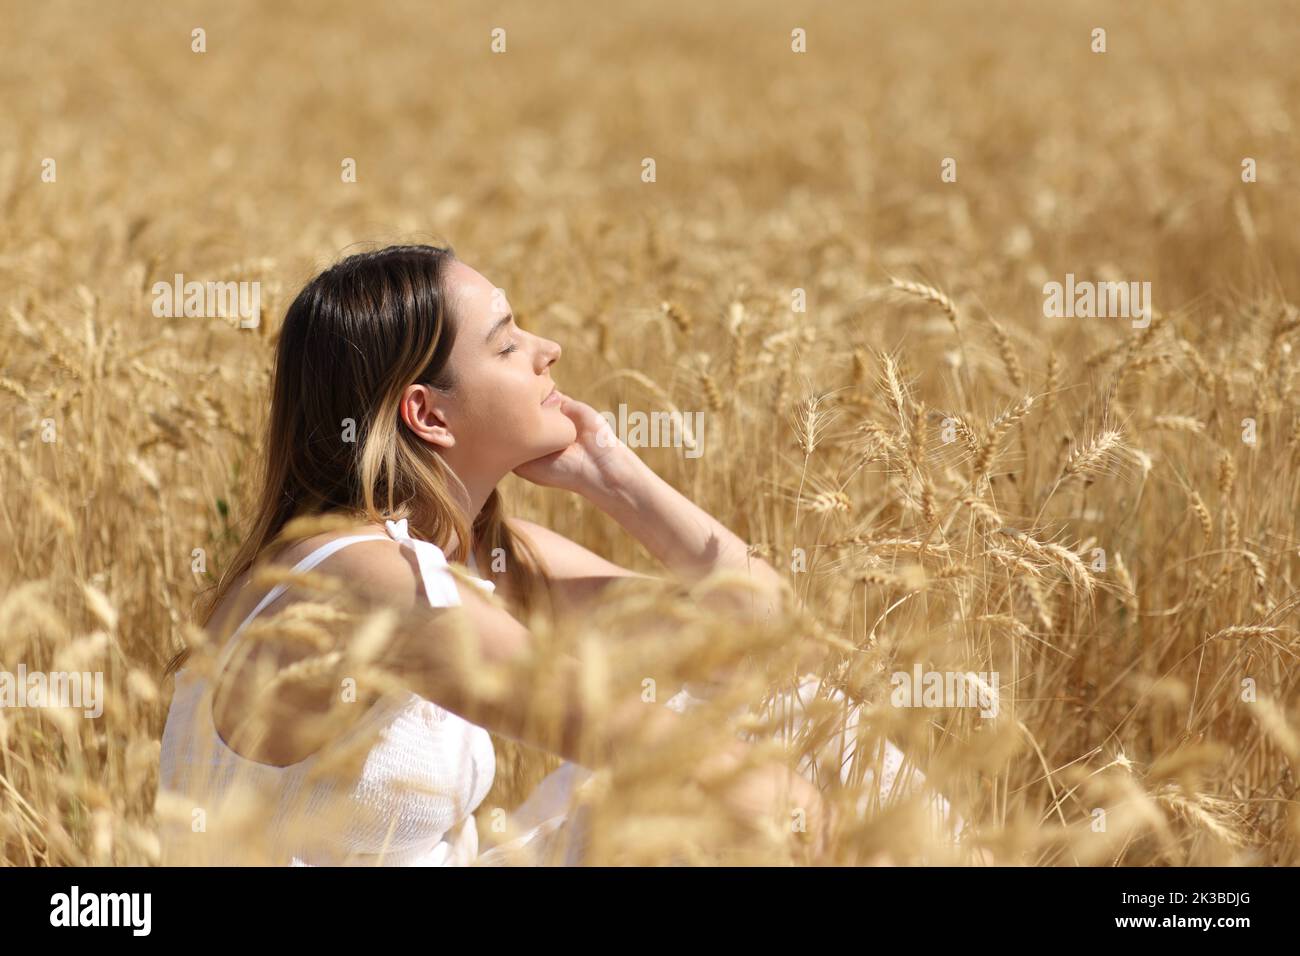 Profile of a relaxed woman resting in a golden wheat field Stock Photo